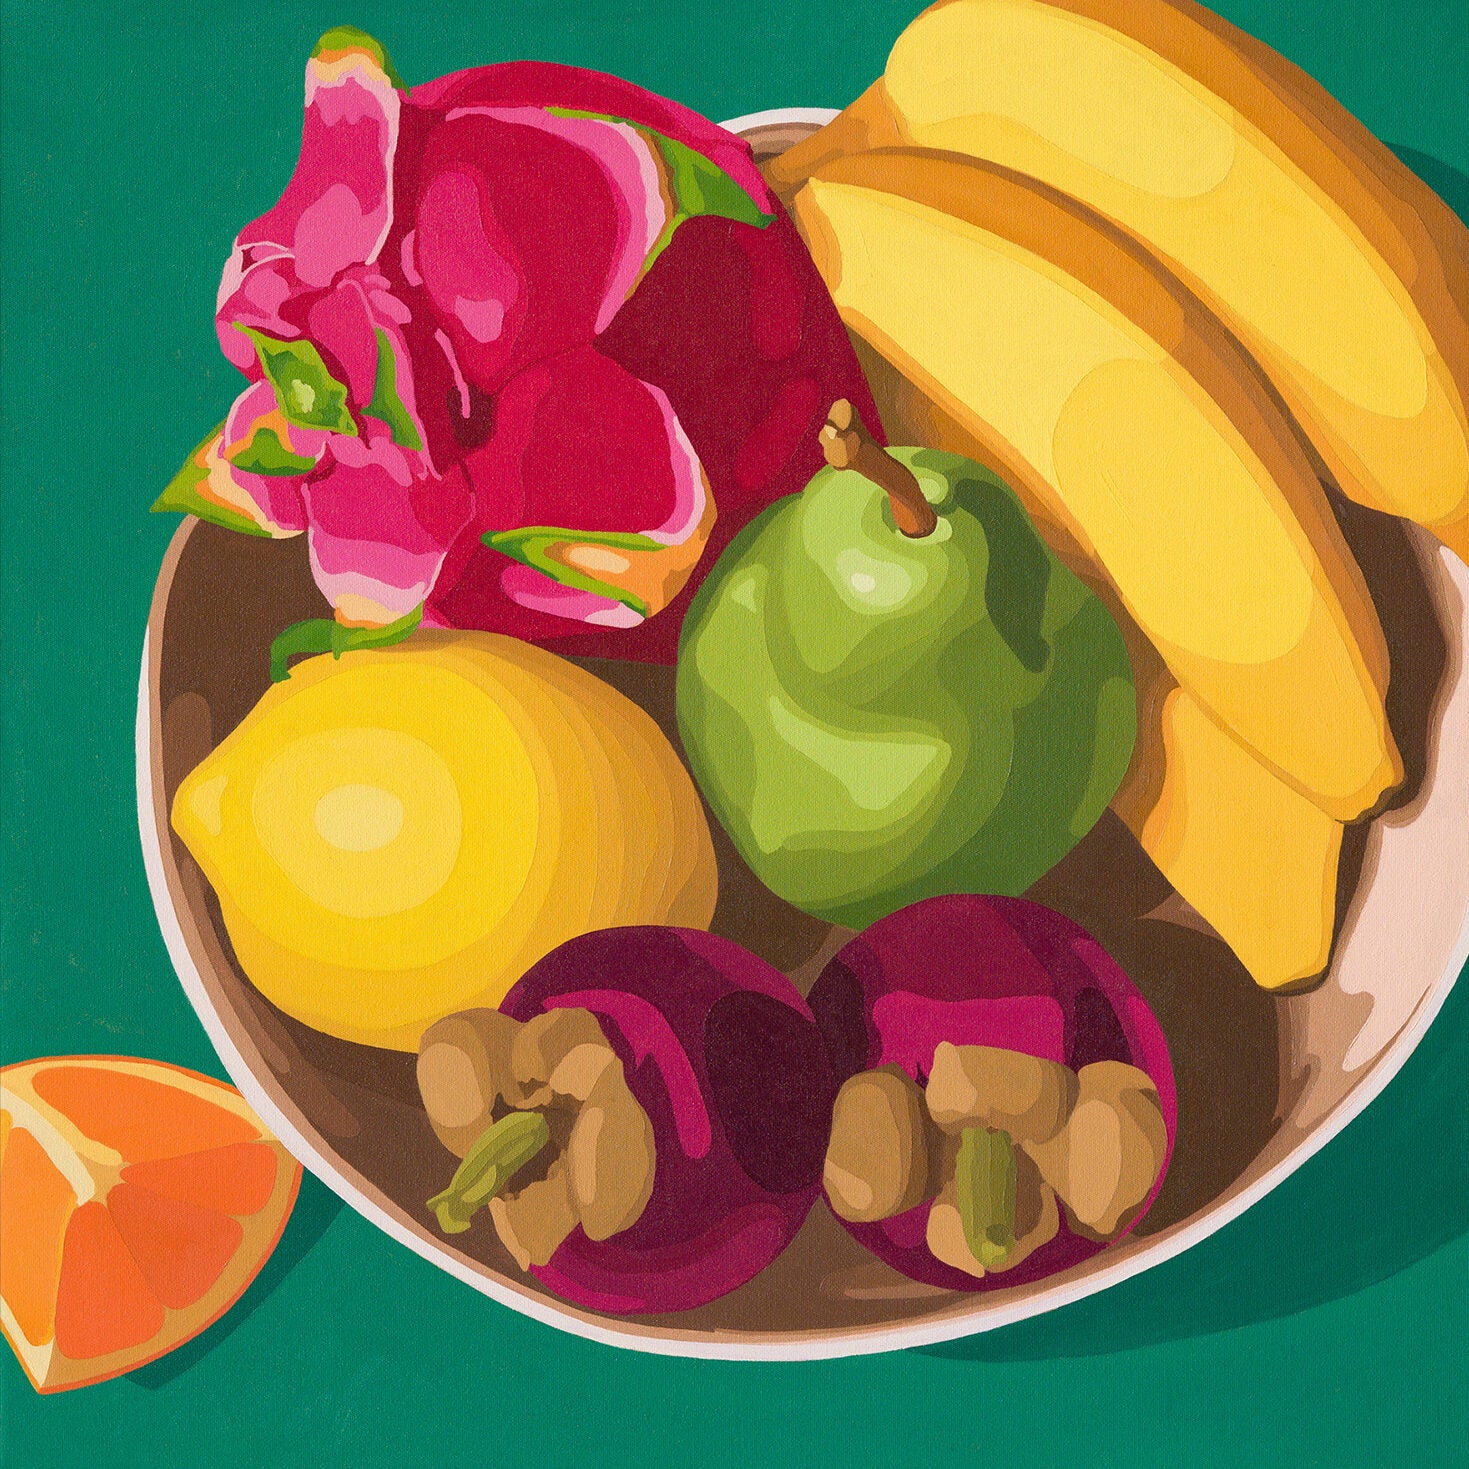 Bowl of Fruit on a sea of green